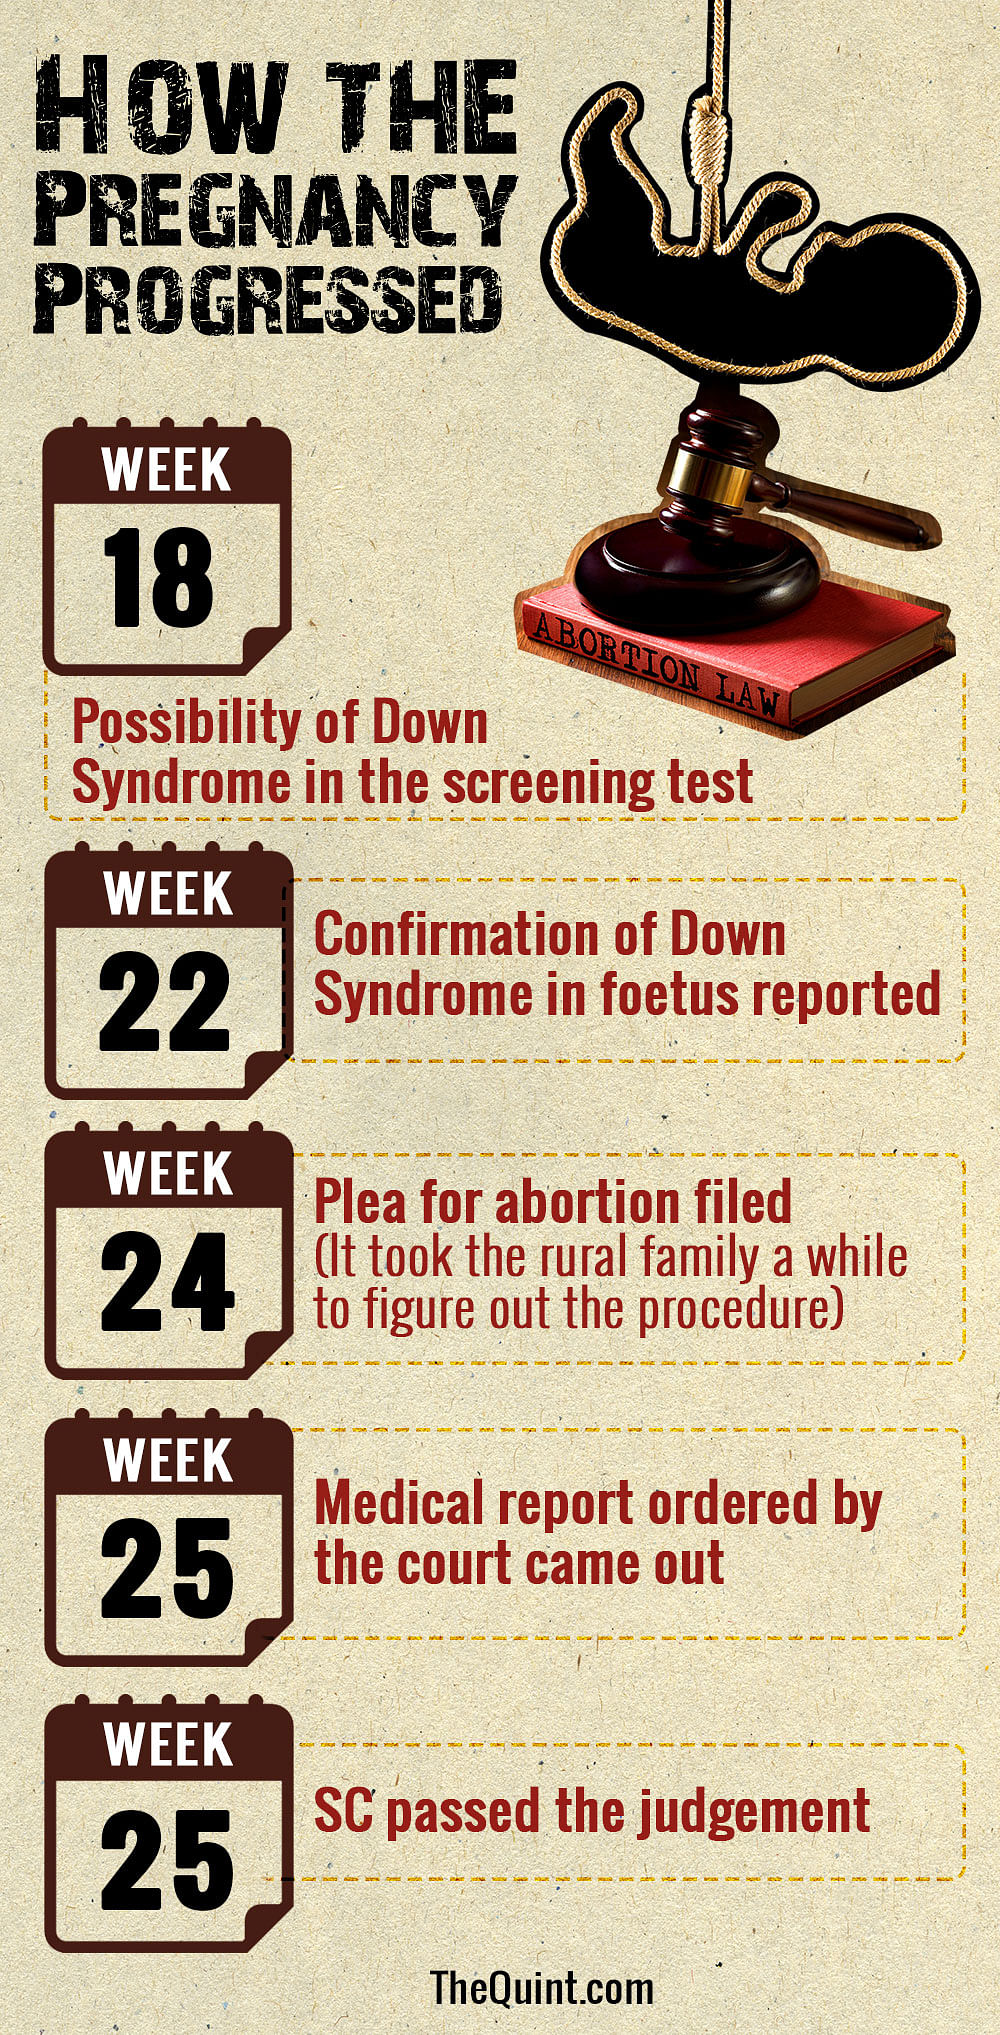 The court denied a woman’s plea for abortion of her 26-week-old foetus suffering from Down Syndrome.